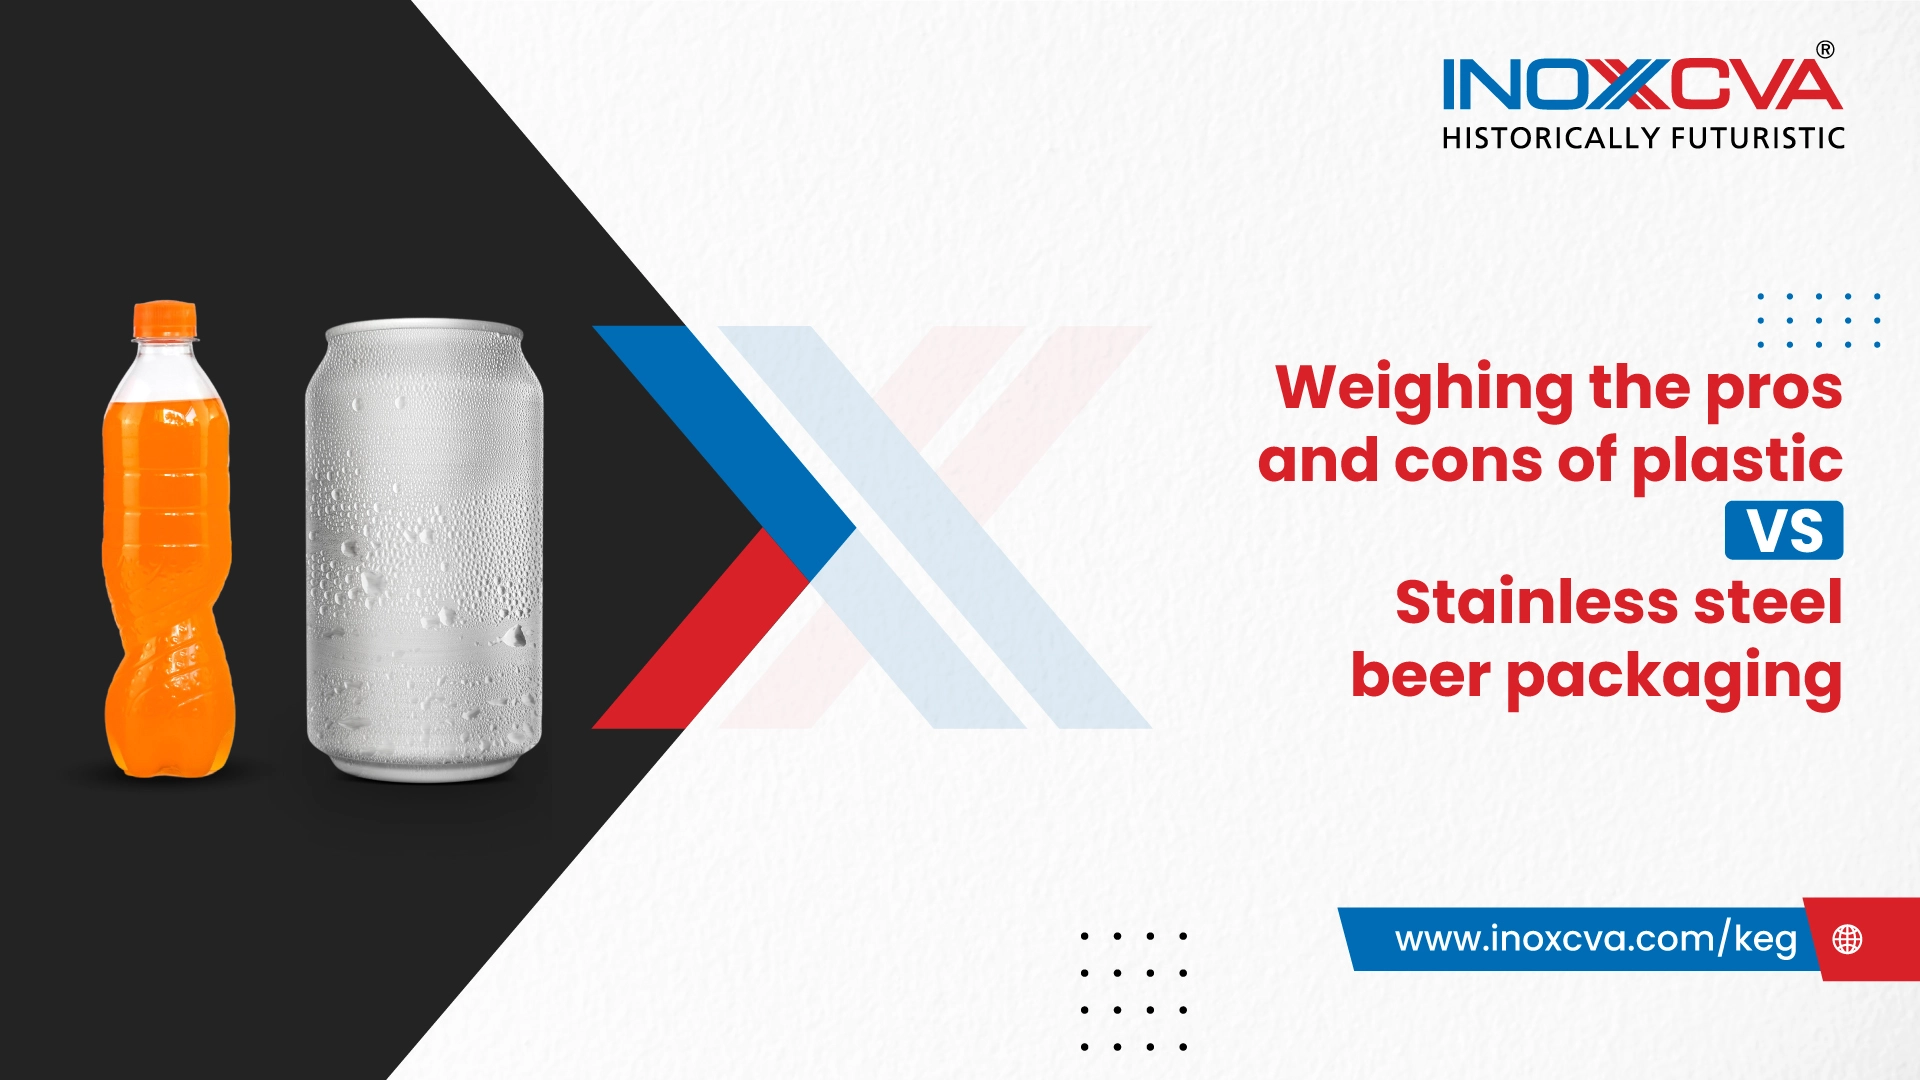 Weighing the pros and cons of plastic vs stainless steel beer packaging. 
